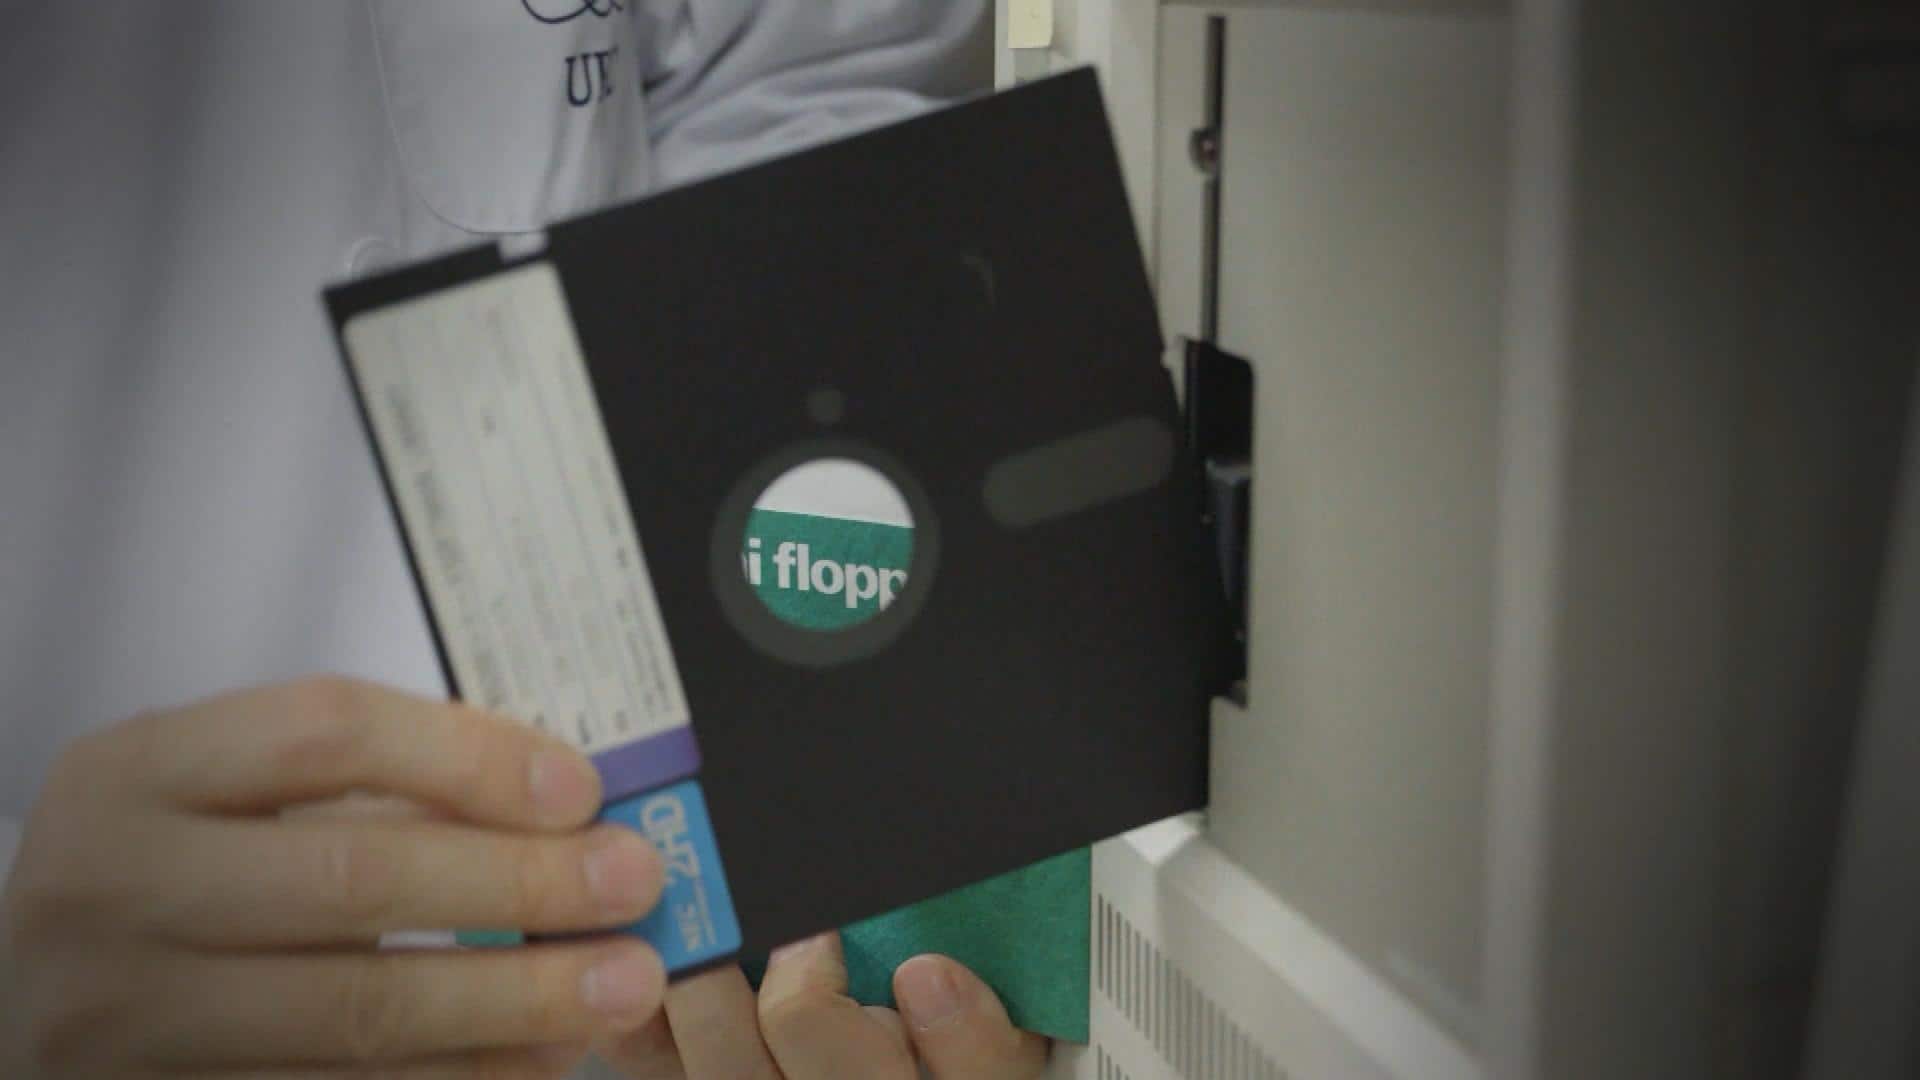 Japanese government phasing out floppy disks, but some users aren't ready to say goodbye